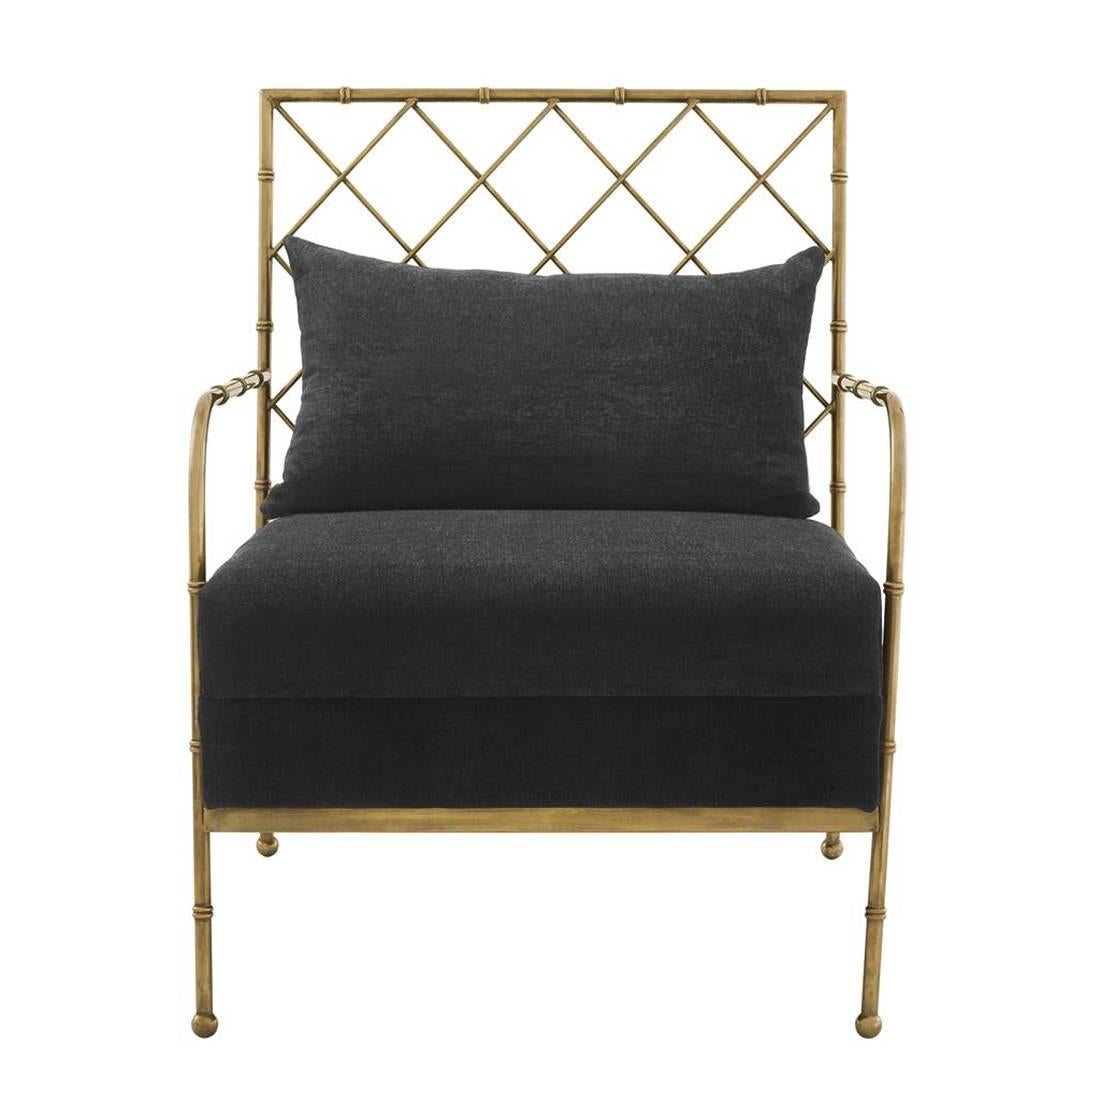 Indian Tropic Armchair with black velvet fabric in Brass or Nickel Finish